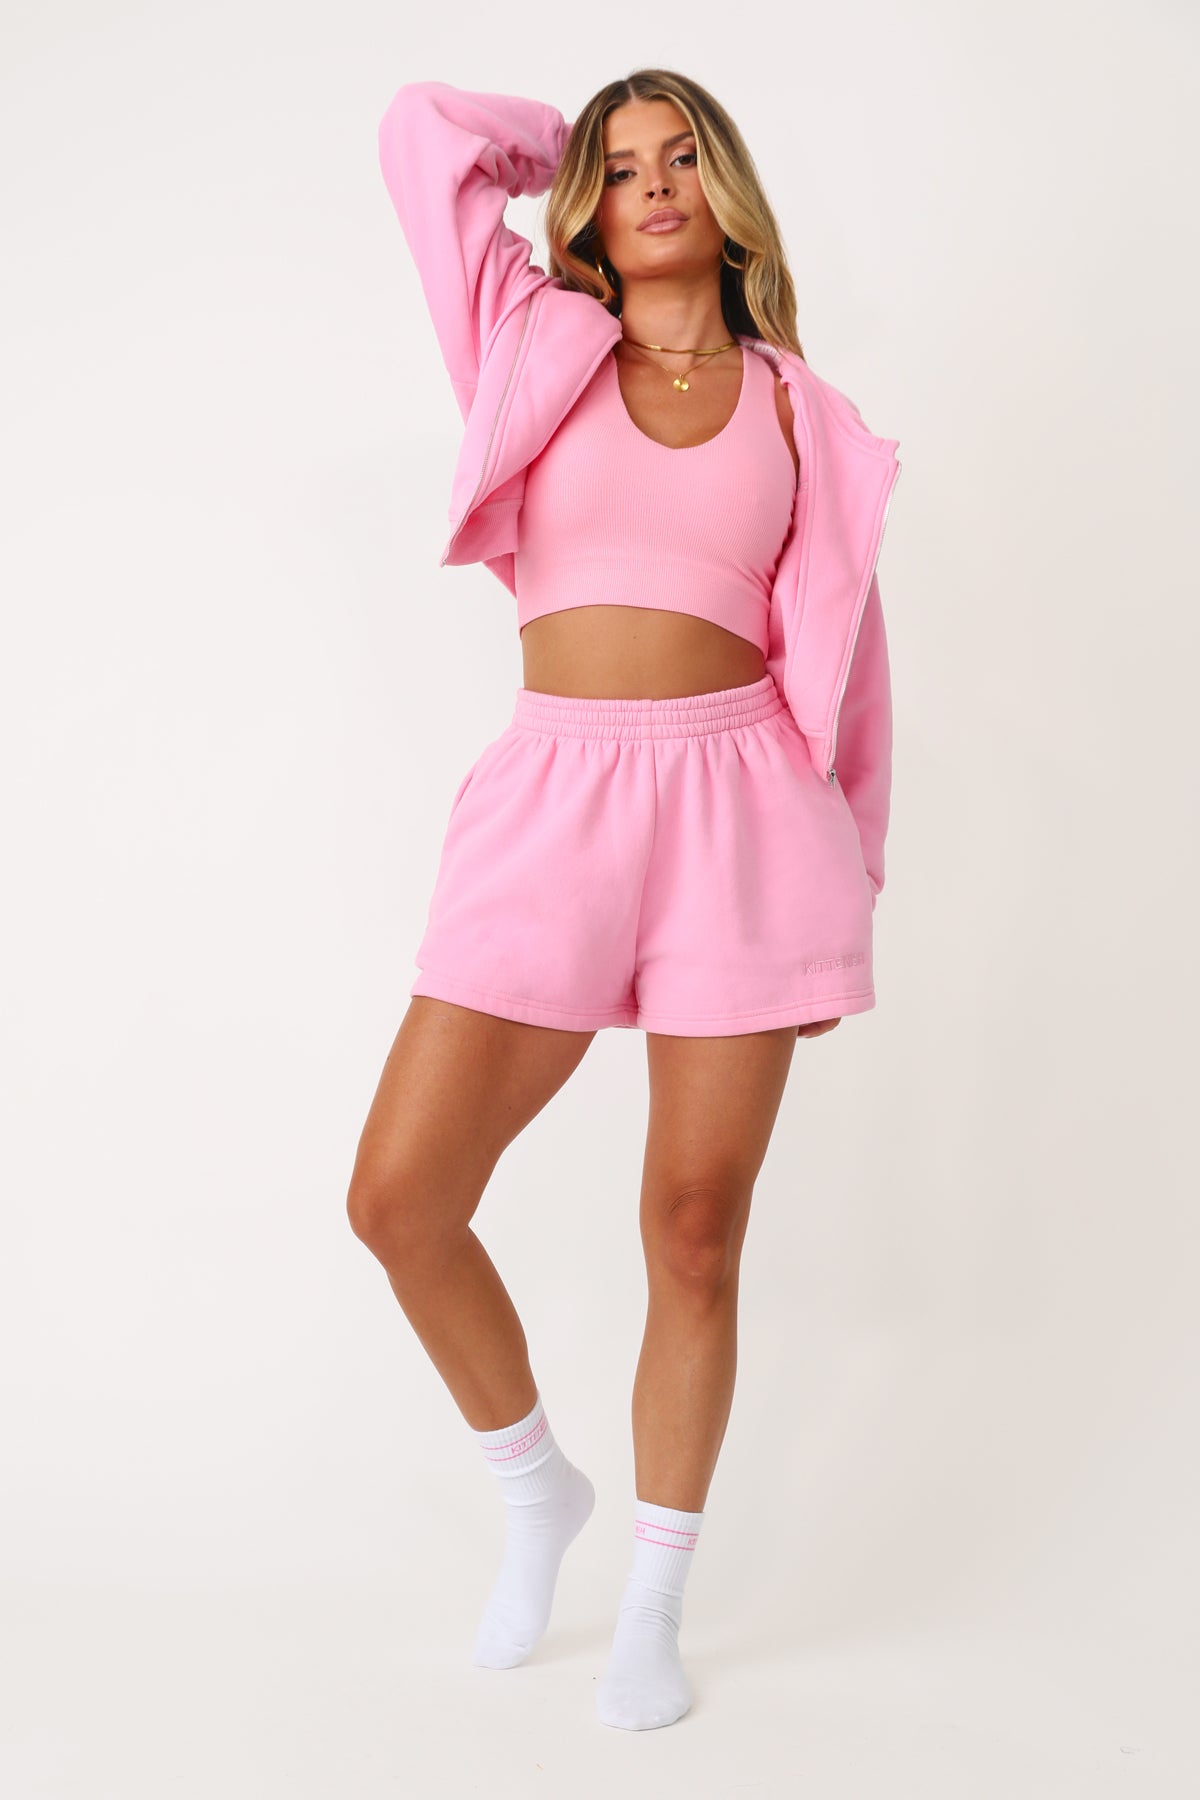 Model wearing the Bubble Gum Pink Kittenish Embroidered sweat short.